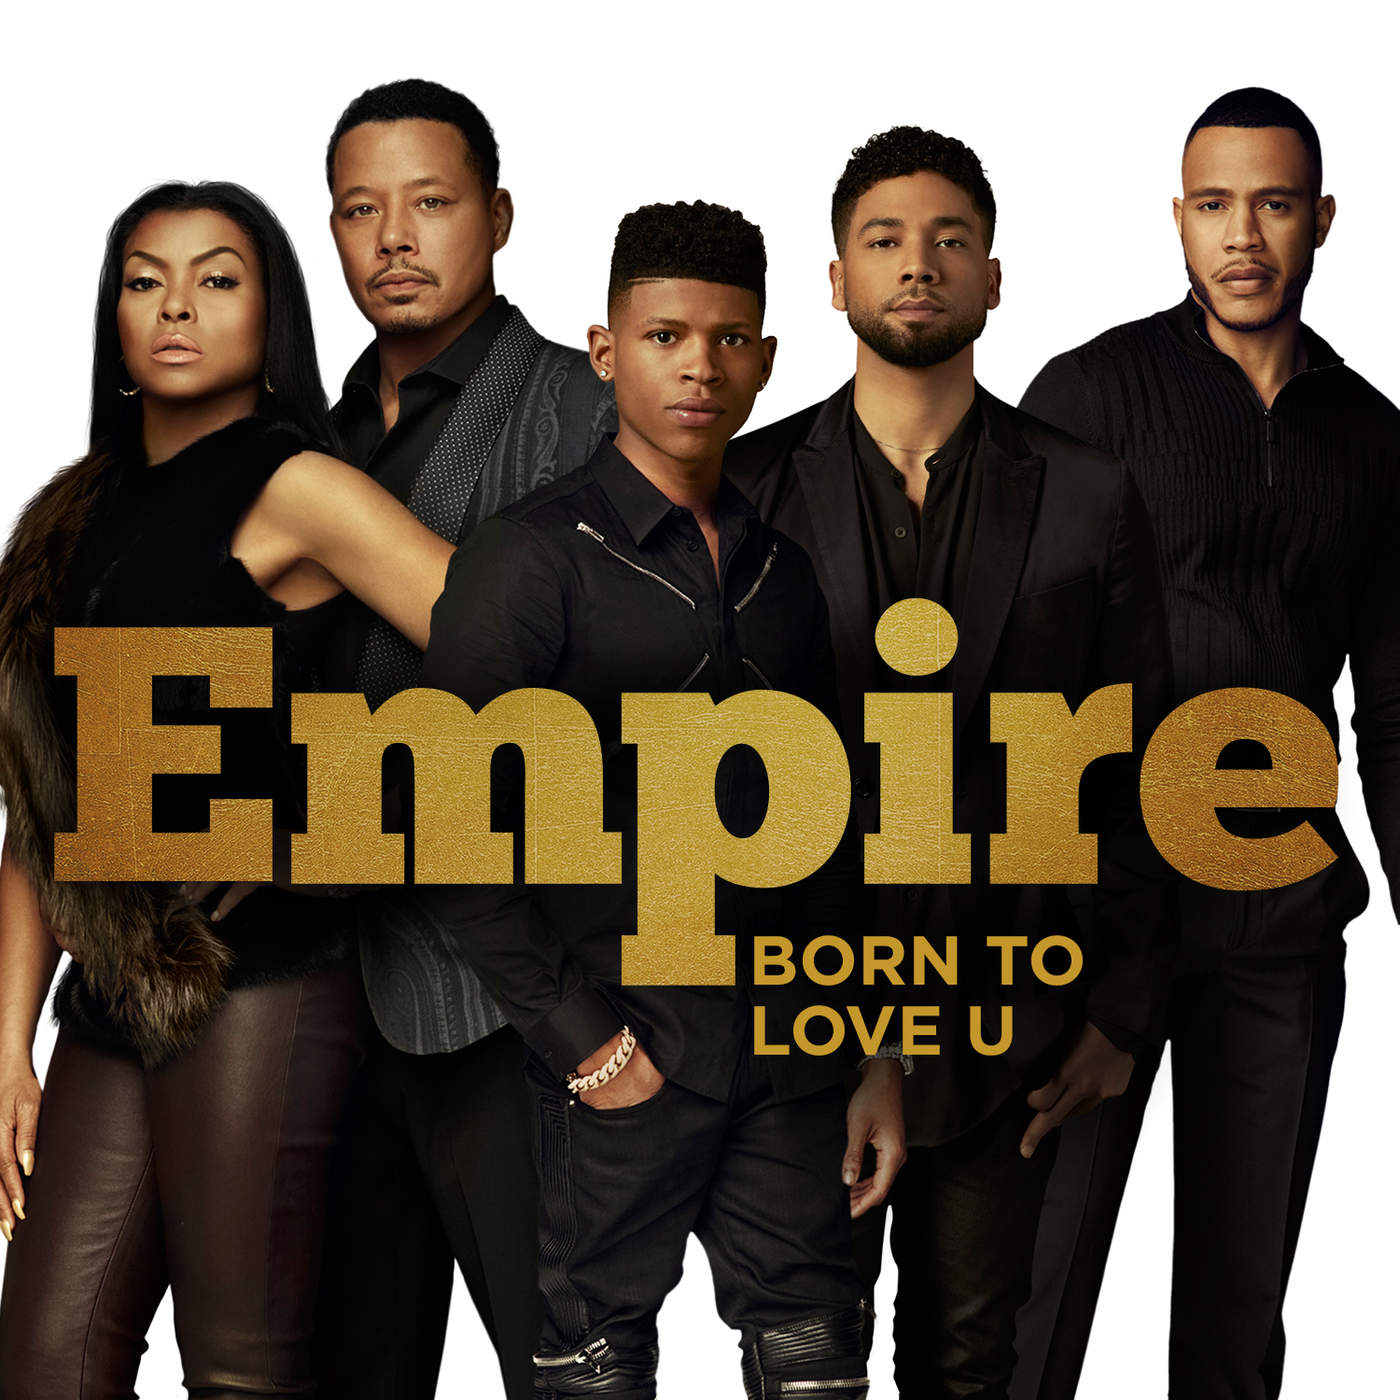 Art for Born to Love U (feat. Terrell Carter) by Empire Cast